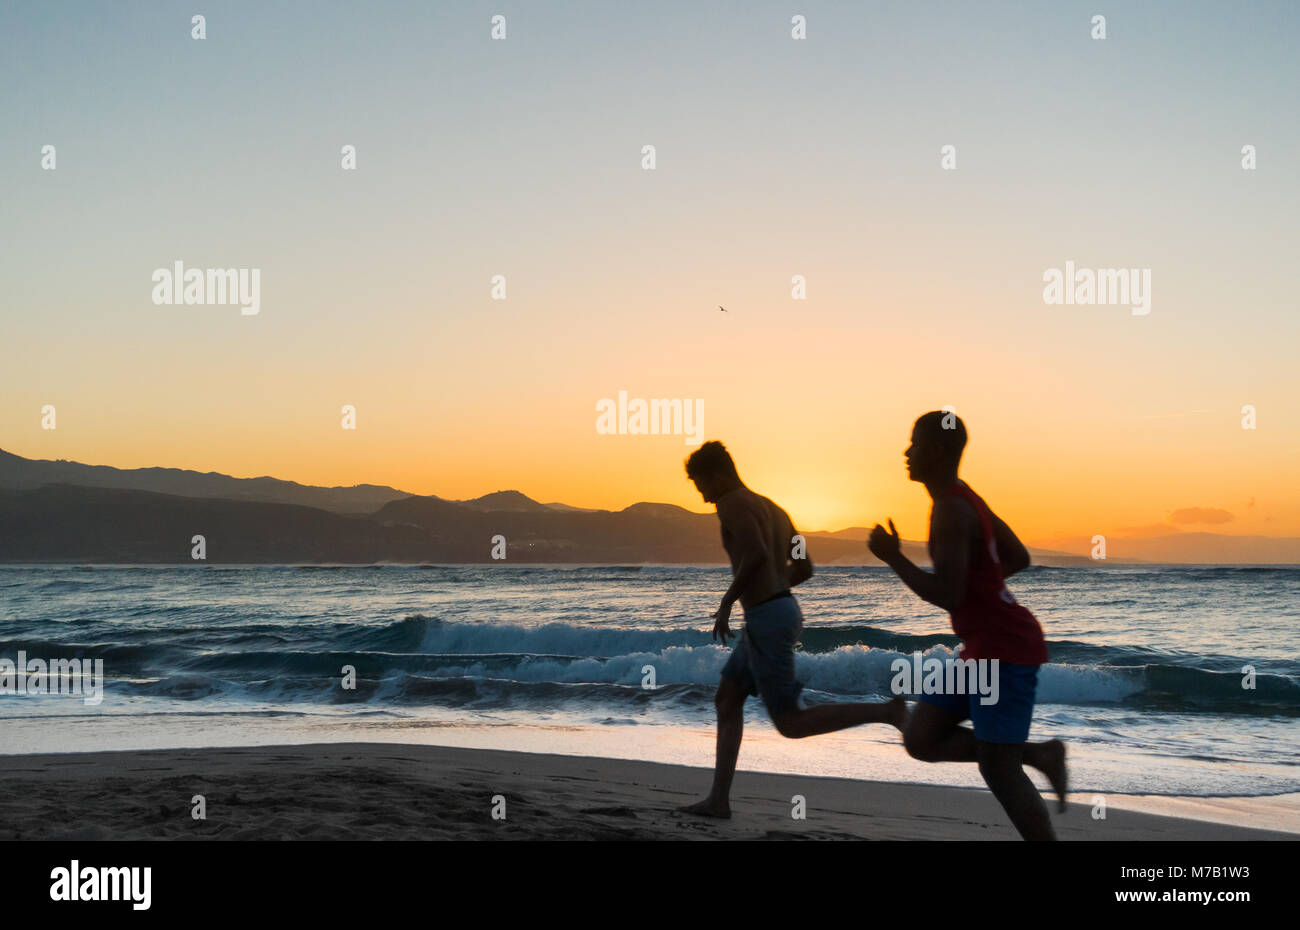 Two young men jogging on beach at sunset Stock Photo